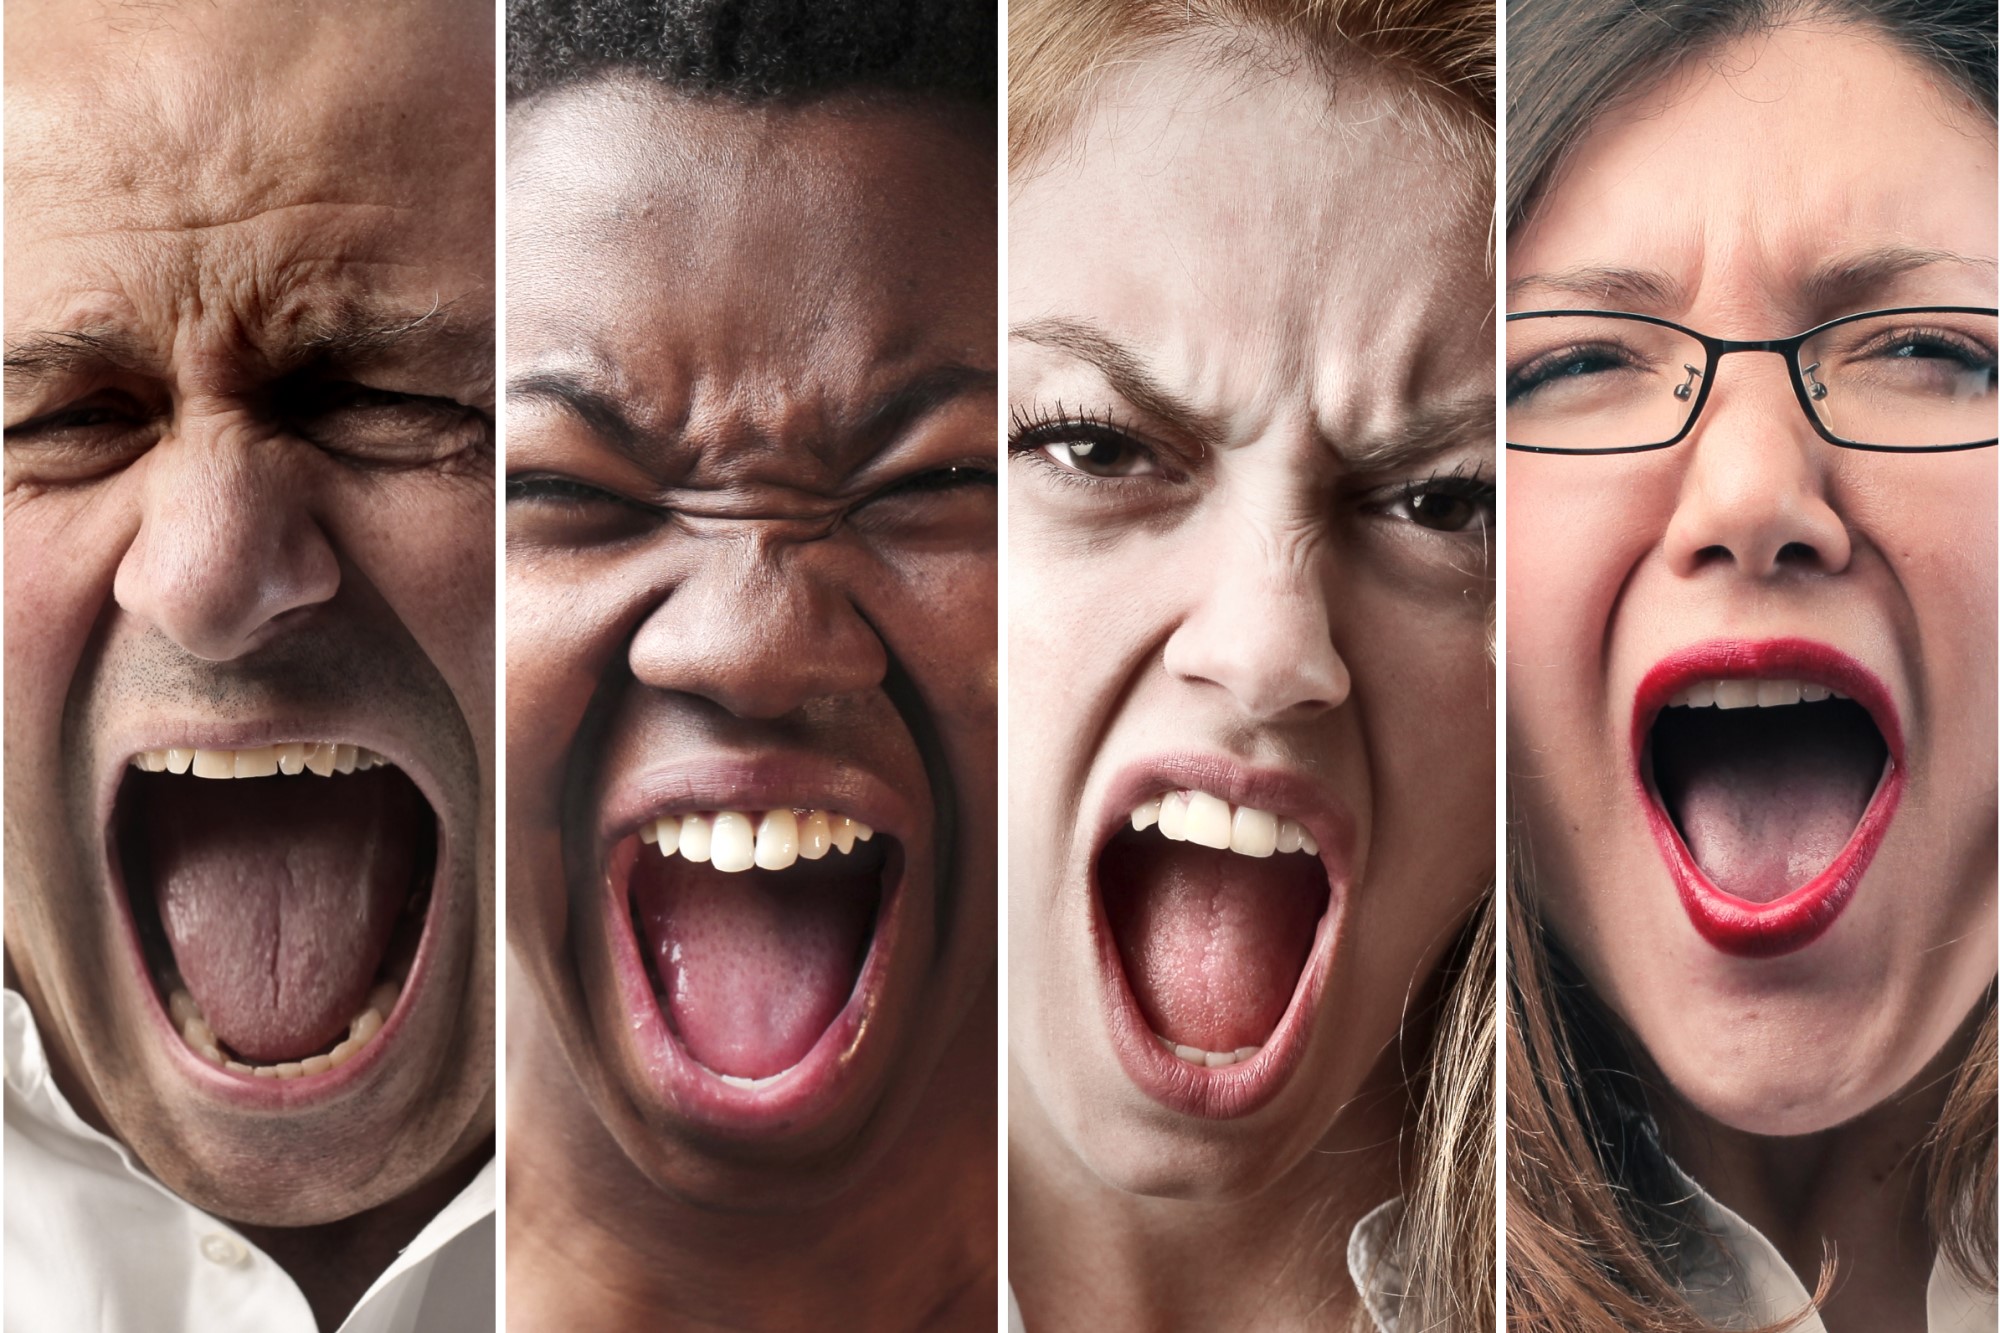 photographs of different people yelling